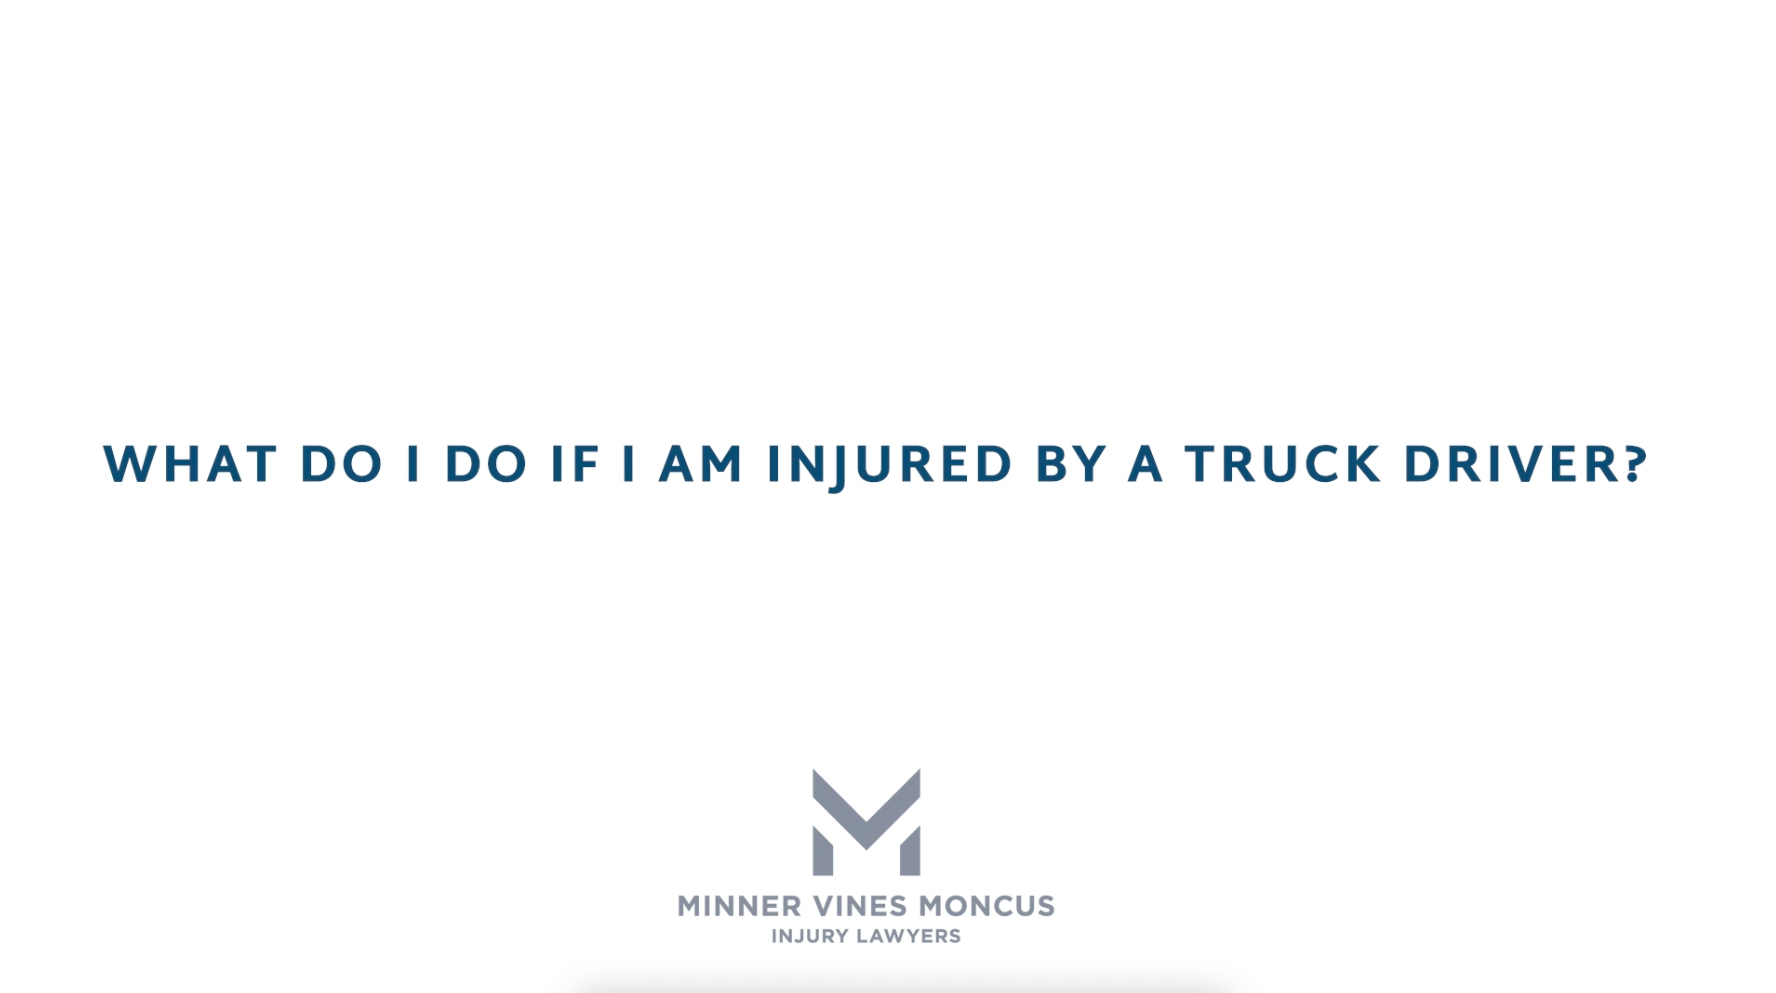 What do I do if I am injured by a truck driver?